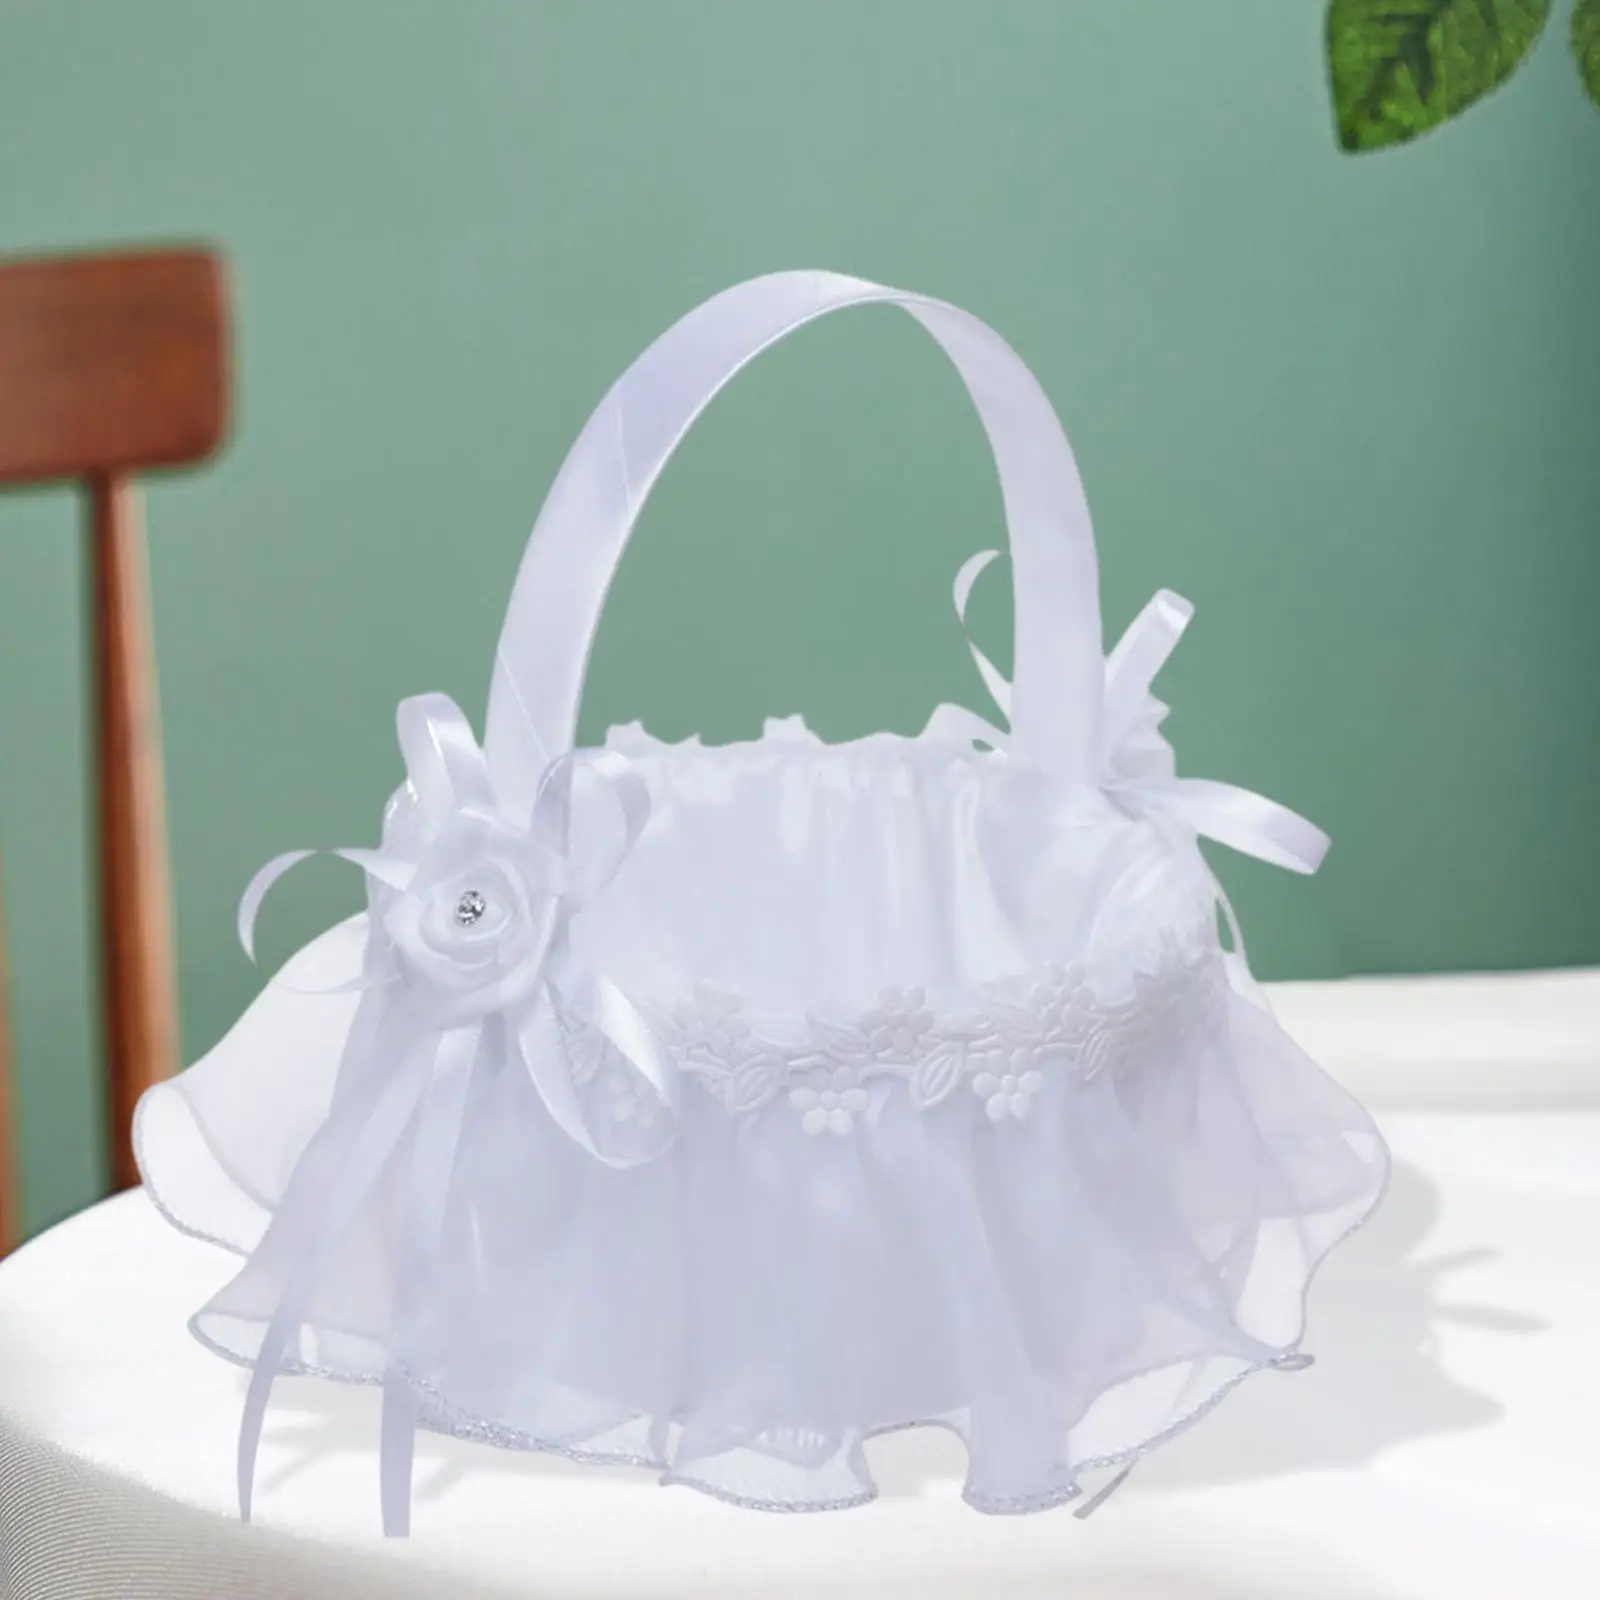 European Style Wedding Flower Girl Basket Fruit Candies Container Comfortable Handle for Events Centerpiece Decoration Ornament